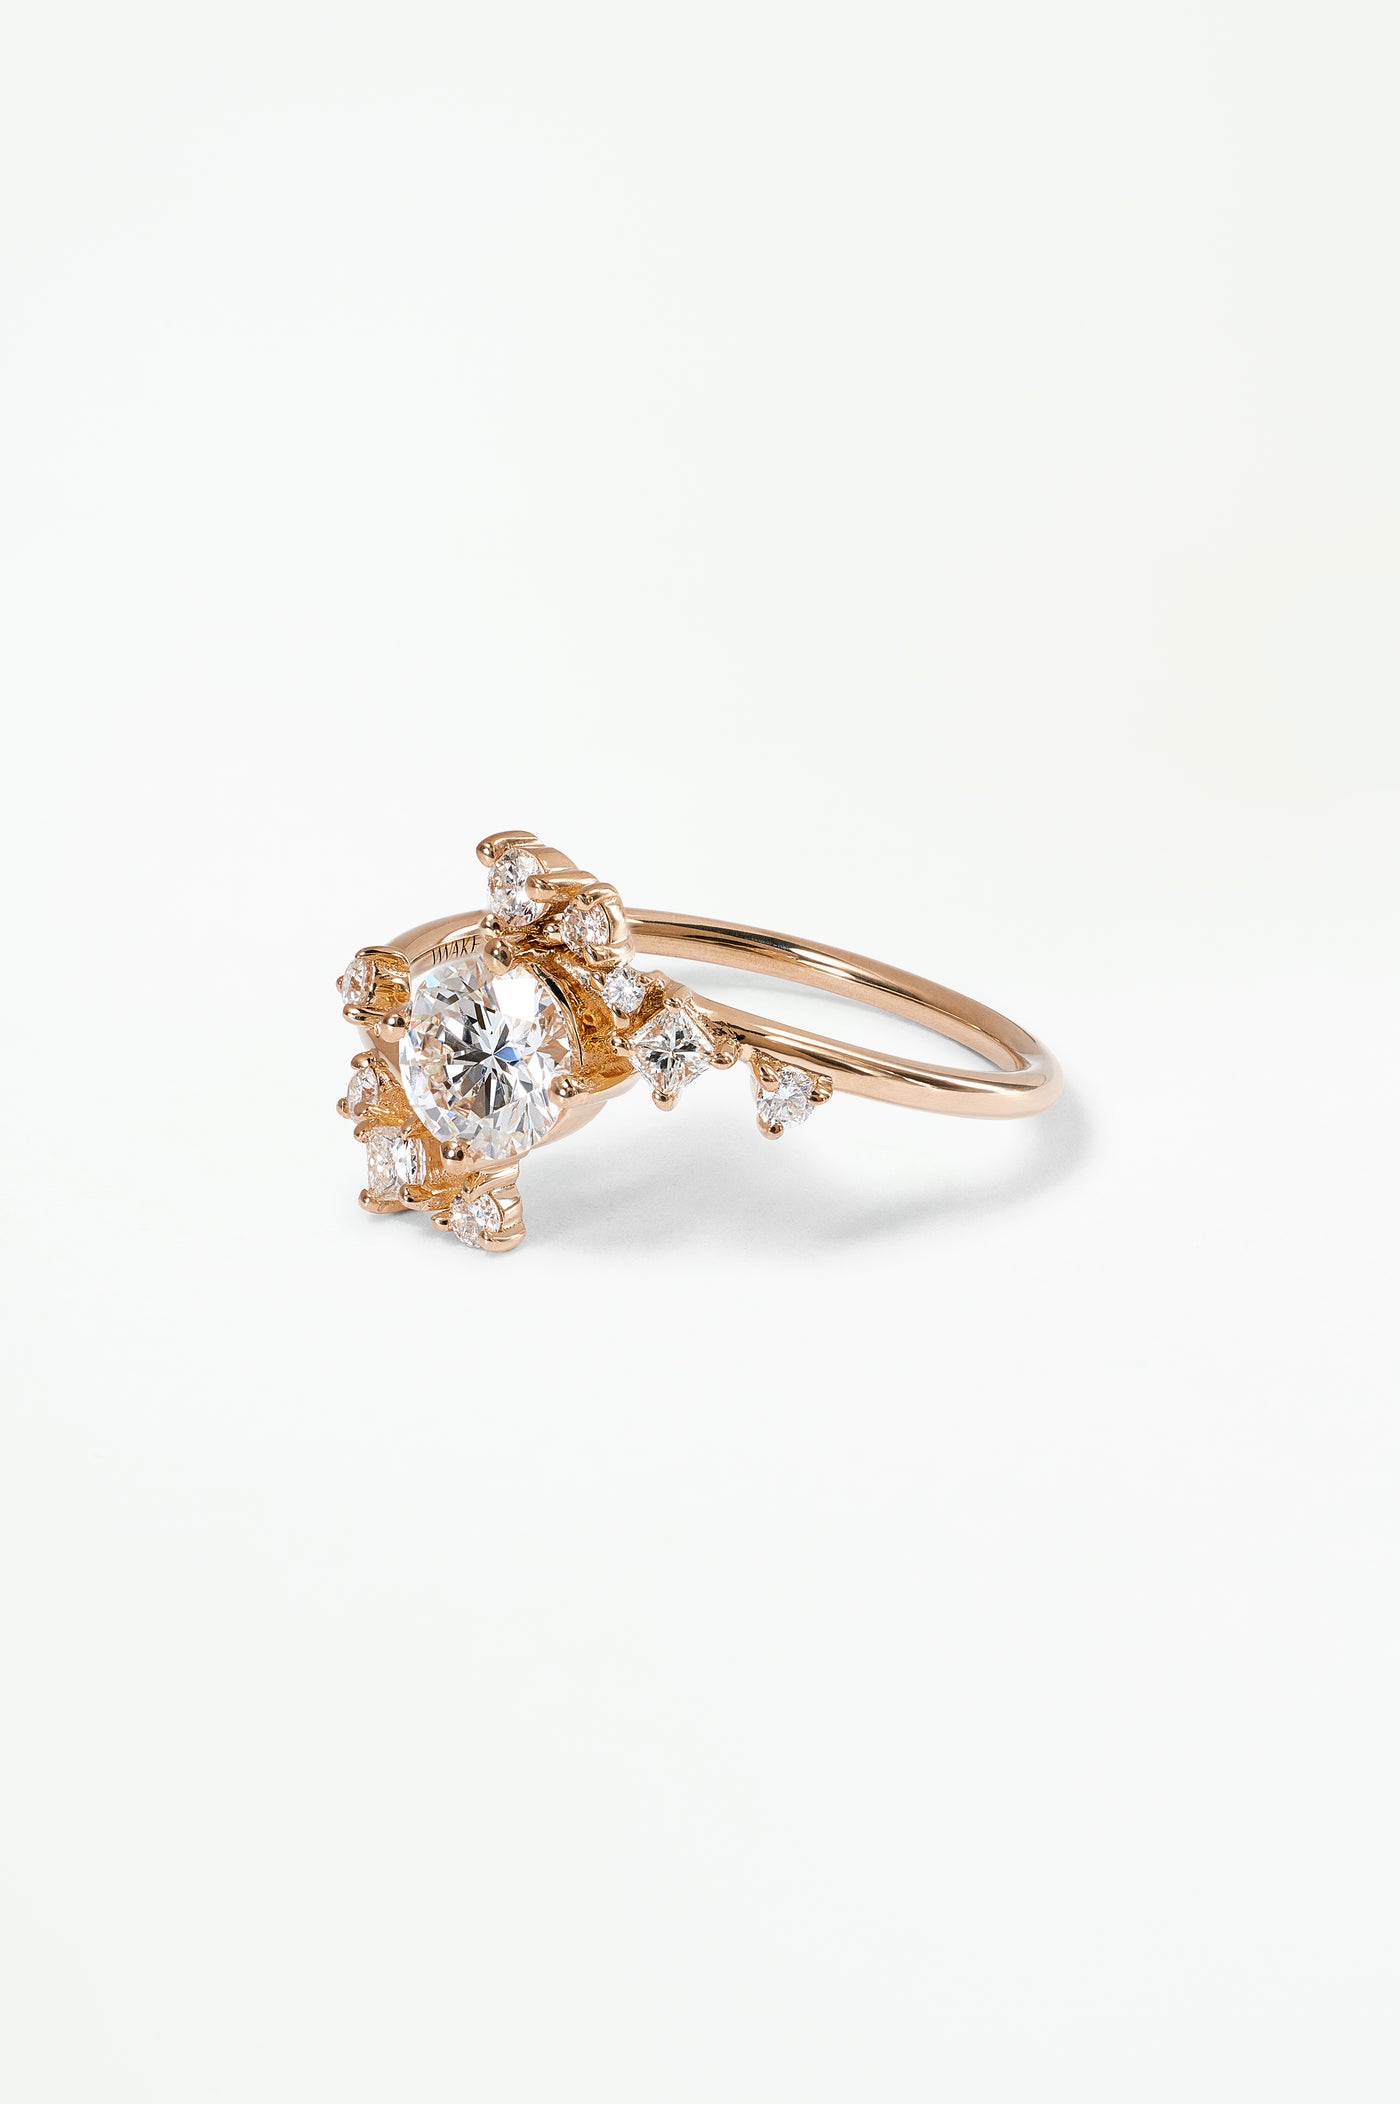 One of a Kind Round Brilliant Cut Diamond Celestial Ring No. 2